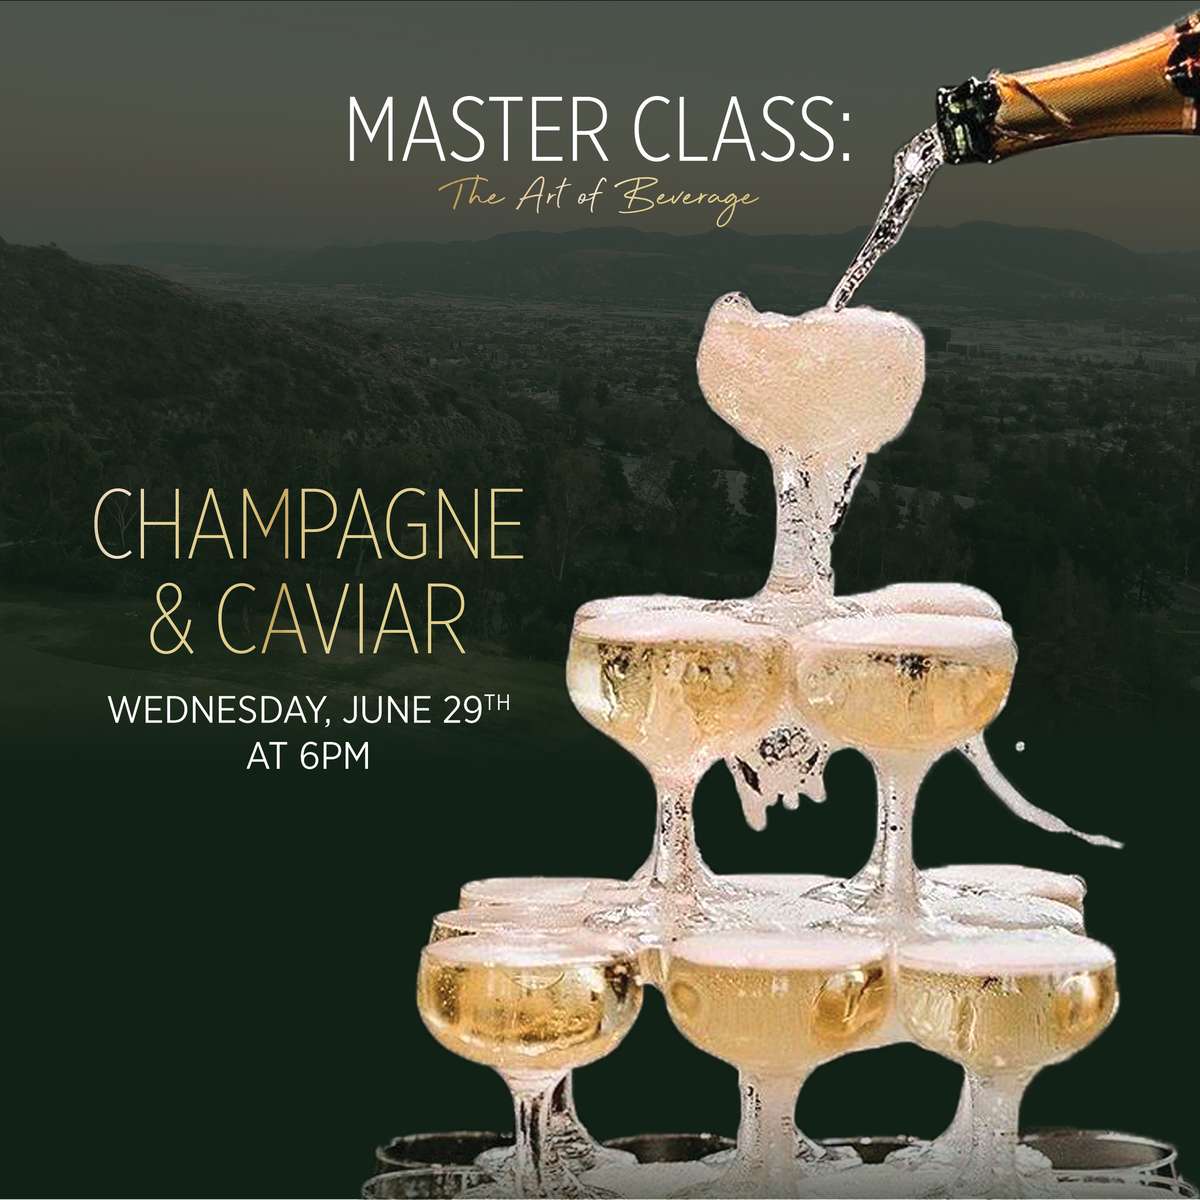 masterclass, champagne and caviar wednesday june 29th at 6pm